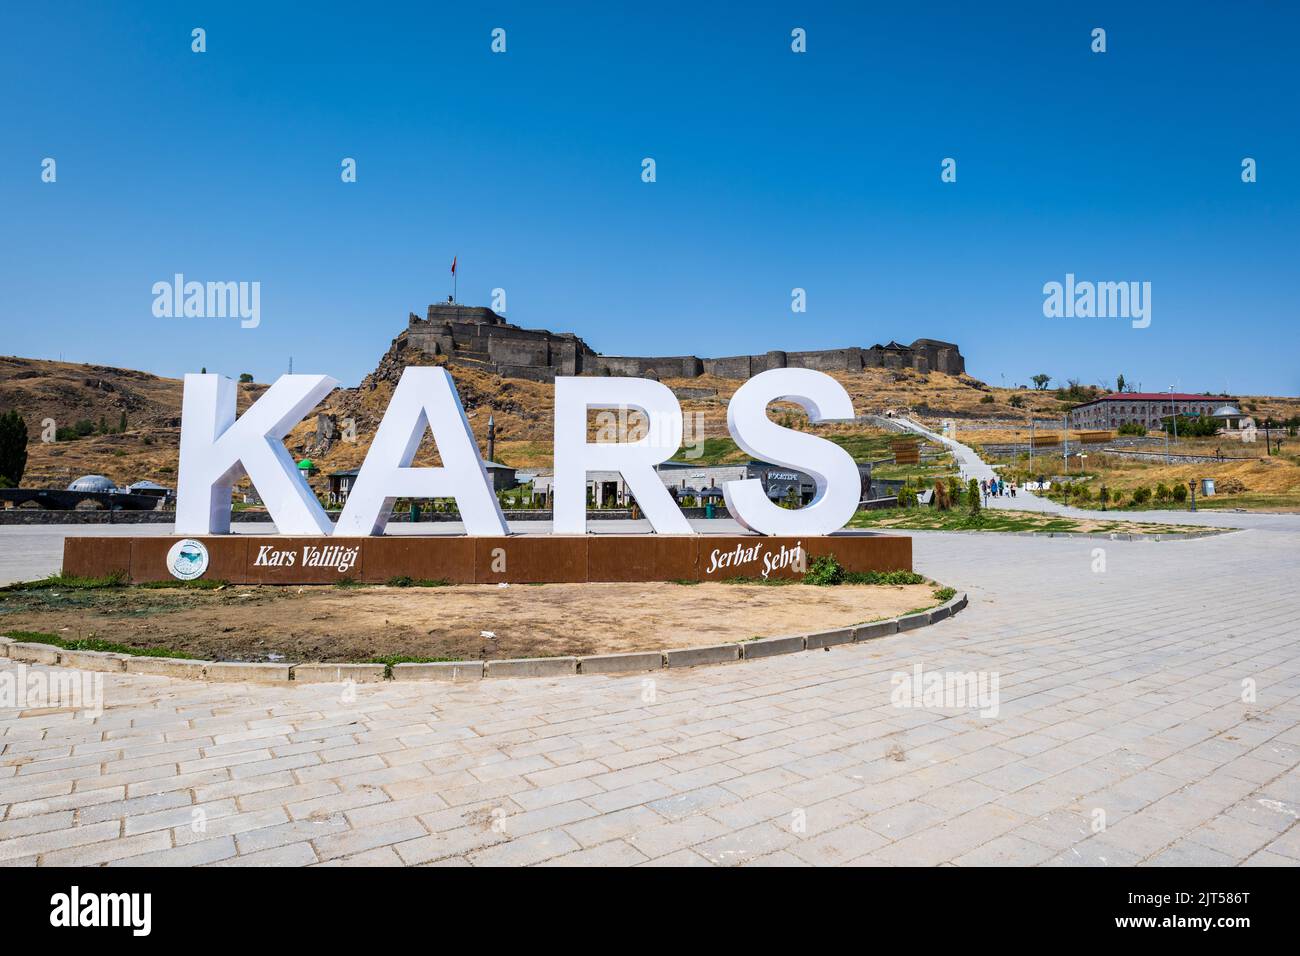 Kars, Turkey - August 2022: Kars Castle and monument for tourists in the center of Kars, Turkey. Stock Photo